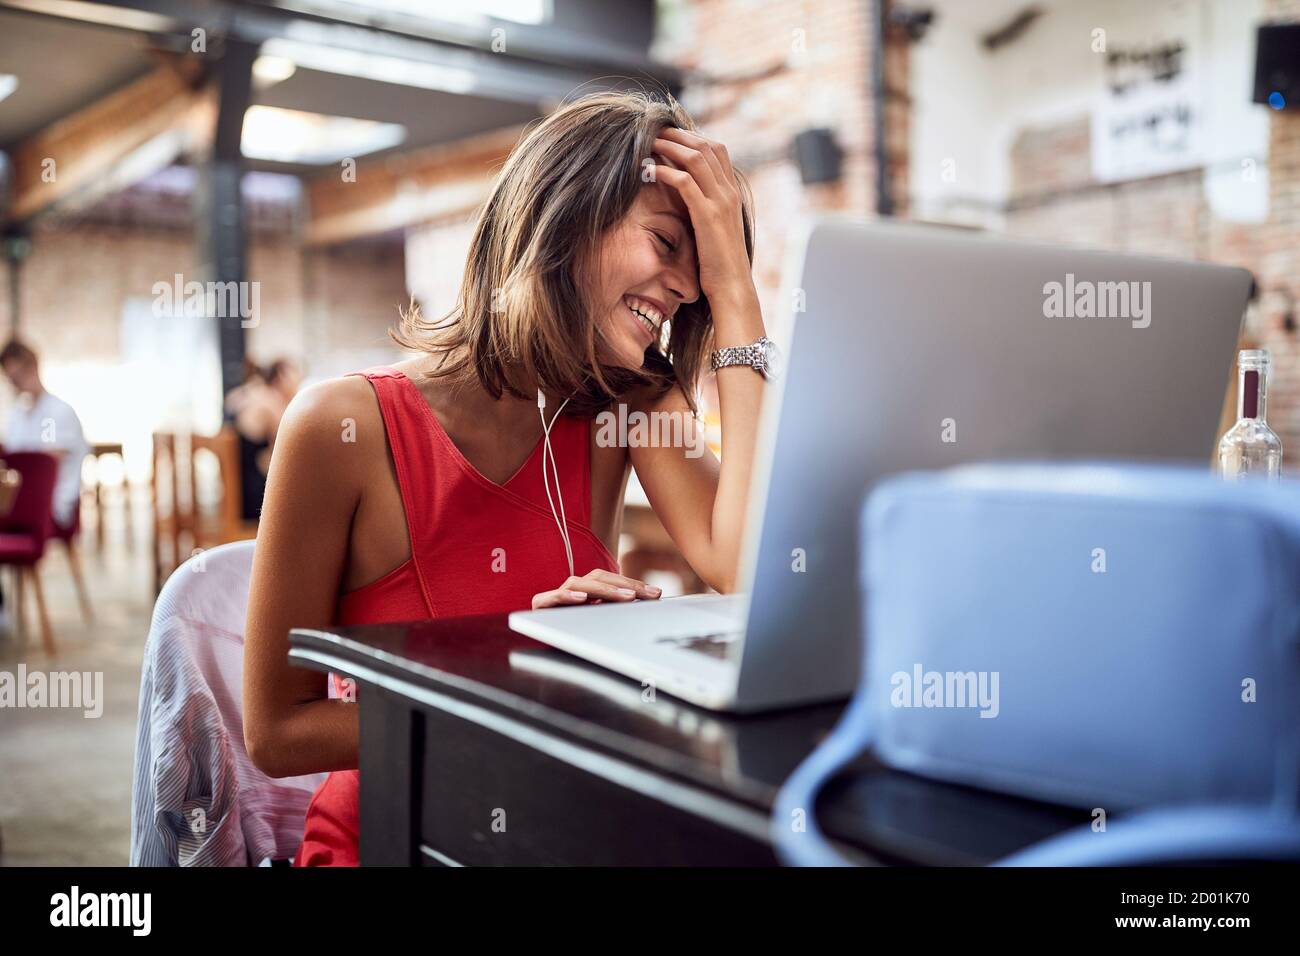 A young beautiful girl at a cafe delighted by video chat with a friend Stock Photo